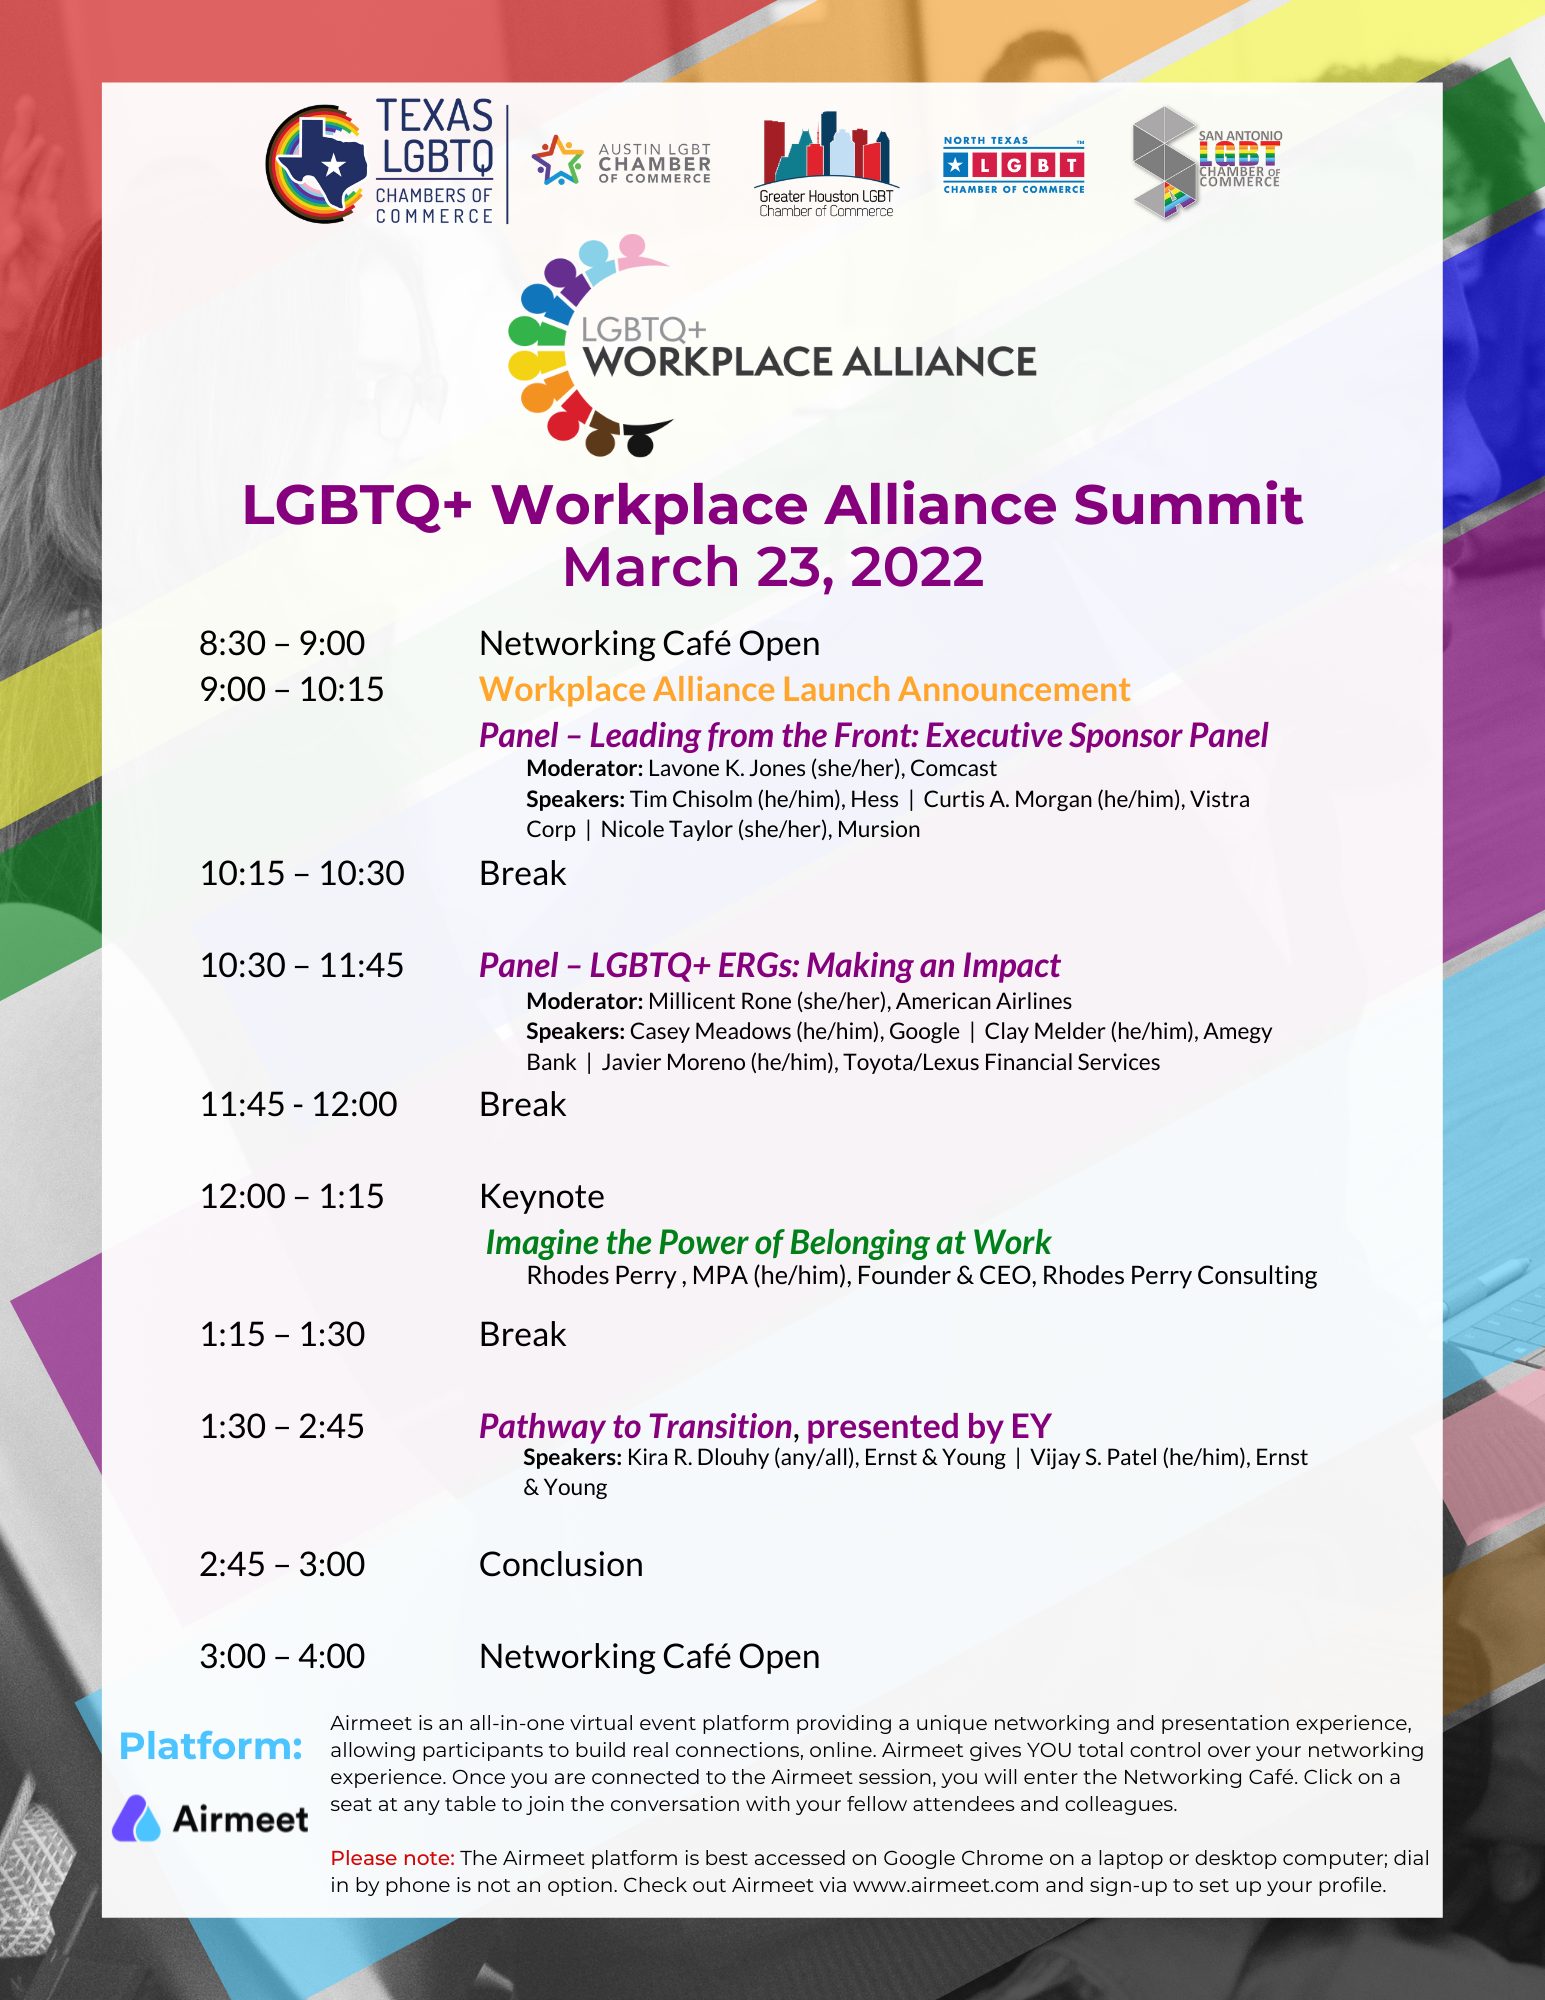 LGBTQ+ Workplace Alliance Summit Participants One-page 3.18.22